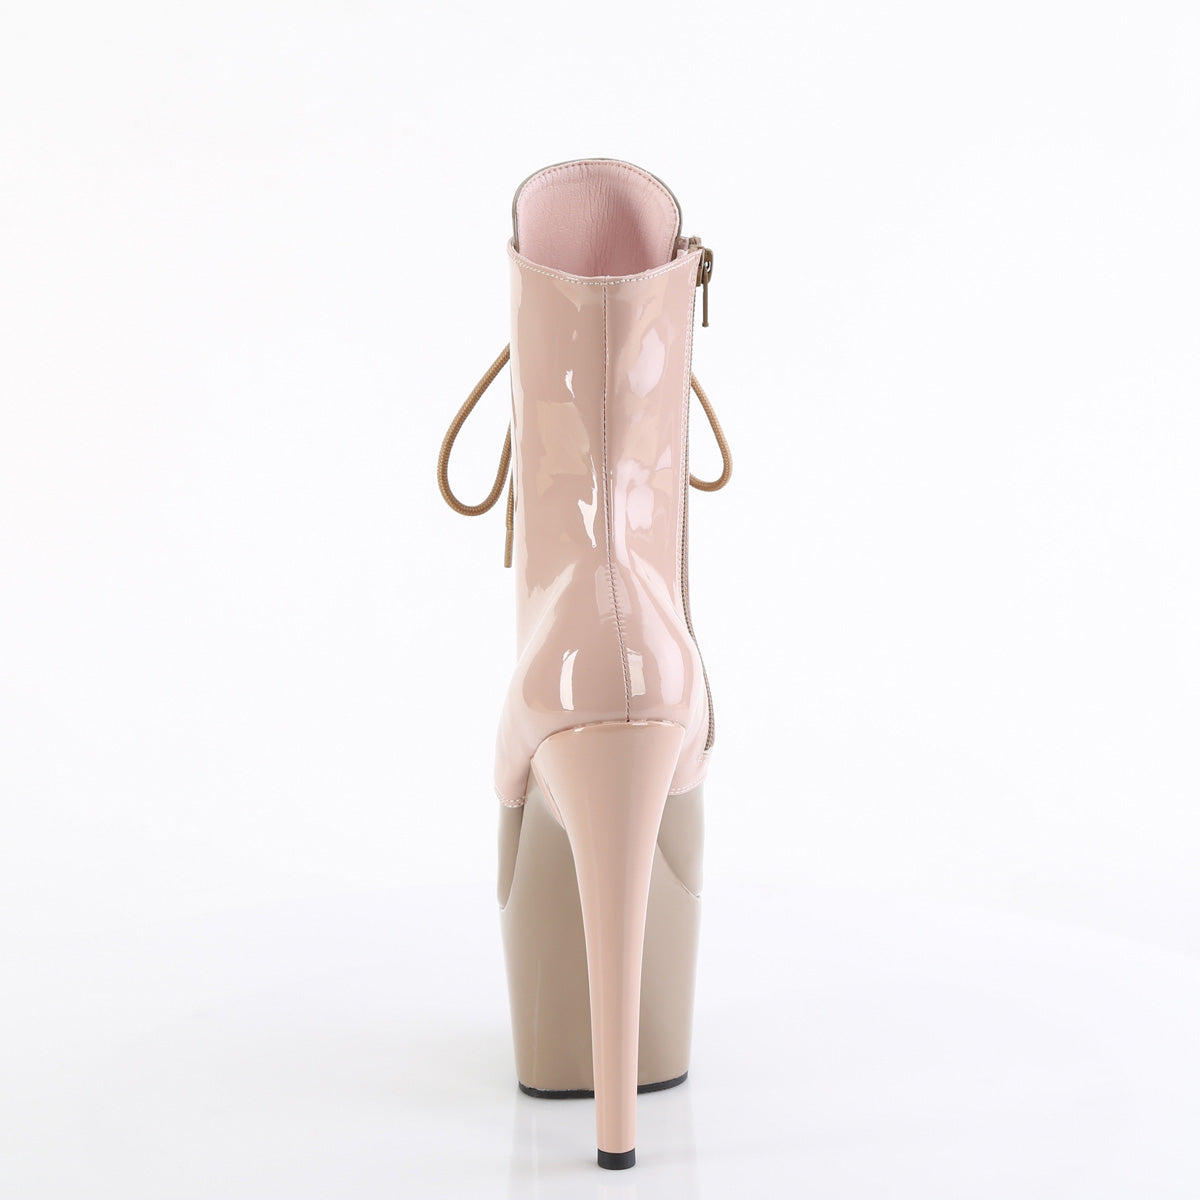 ADORE-1020DC - Dusty Pink-Sand Patent Boots